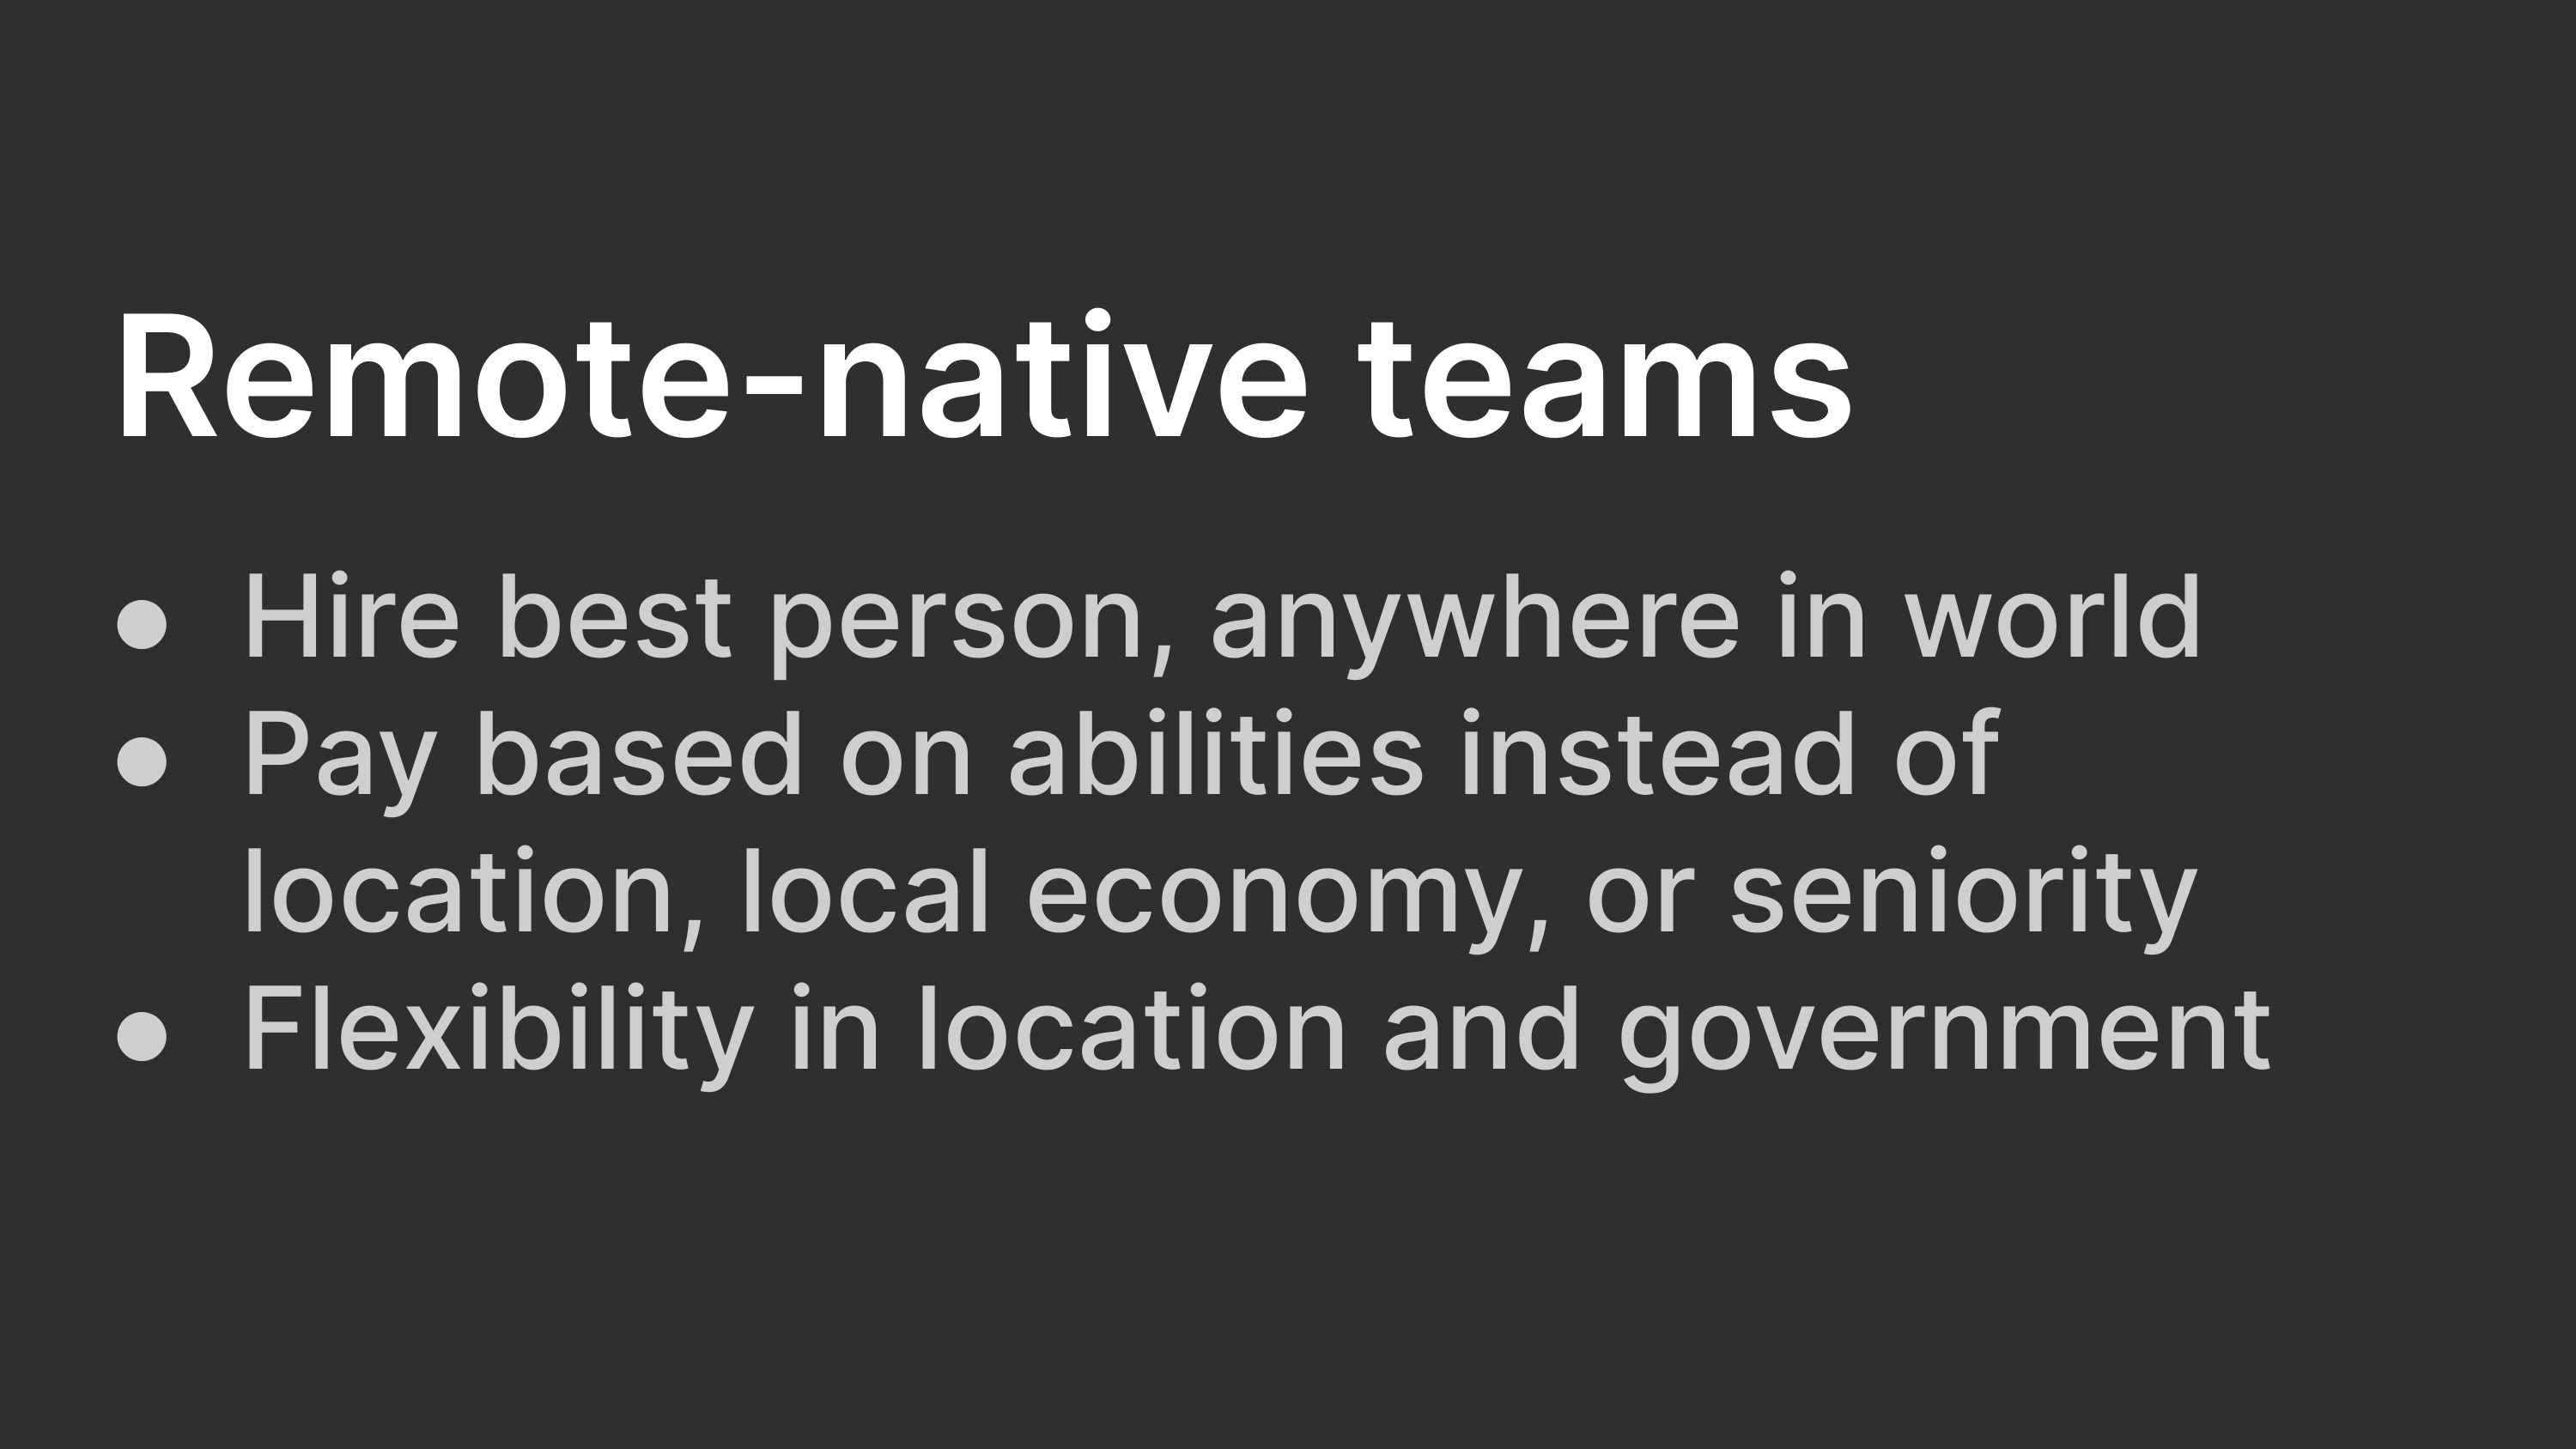 Remote-native teams: Hire best person, anywhere in world; Pay based on abilities instead of location, local economy, or seniority; Flexibility in location and government